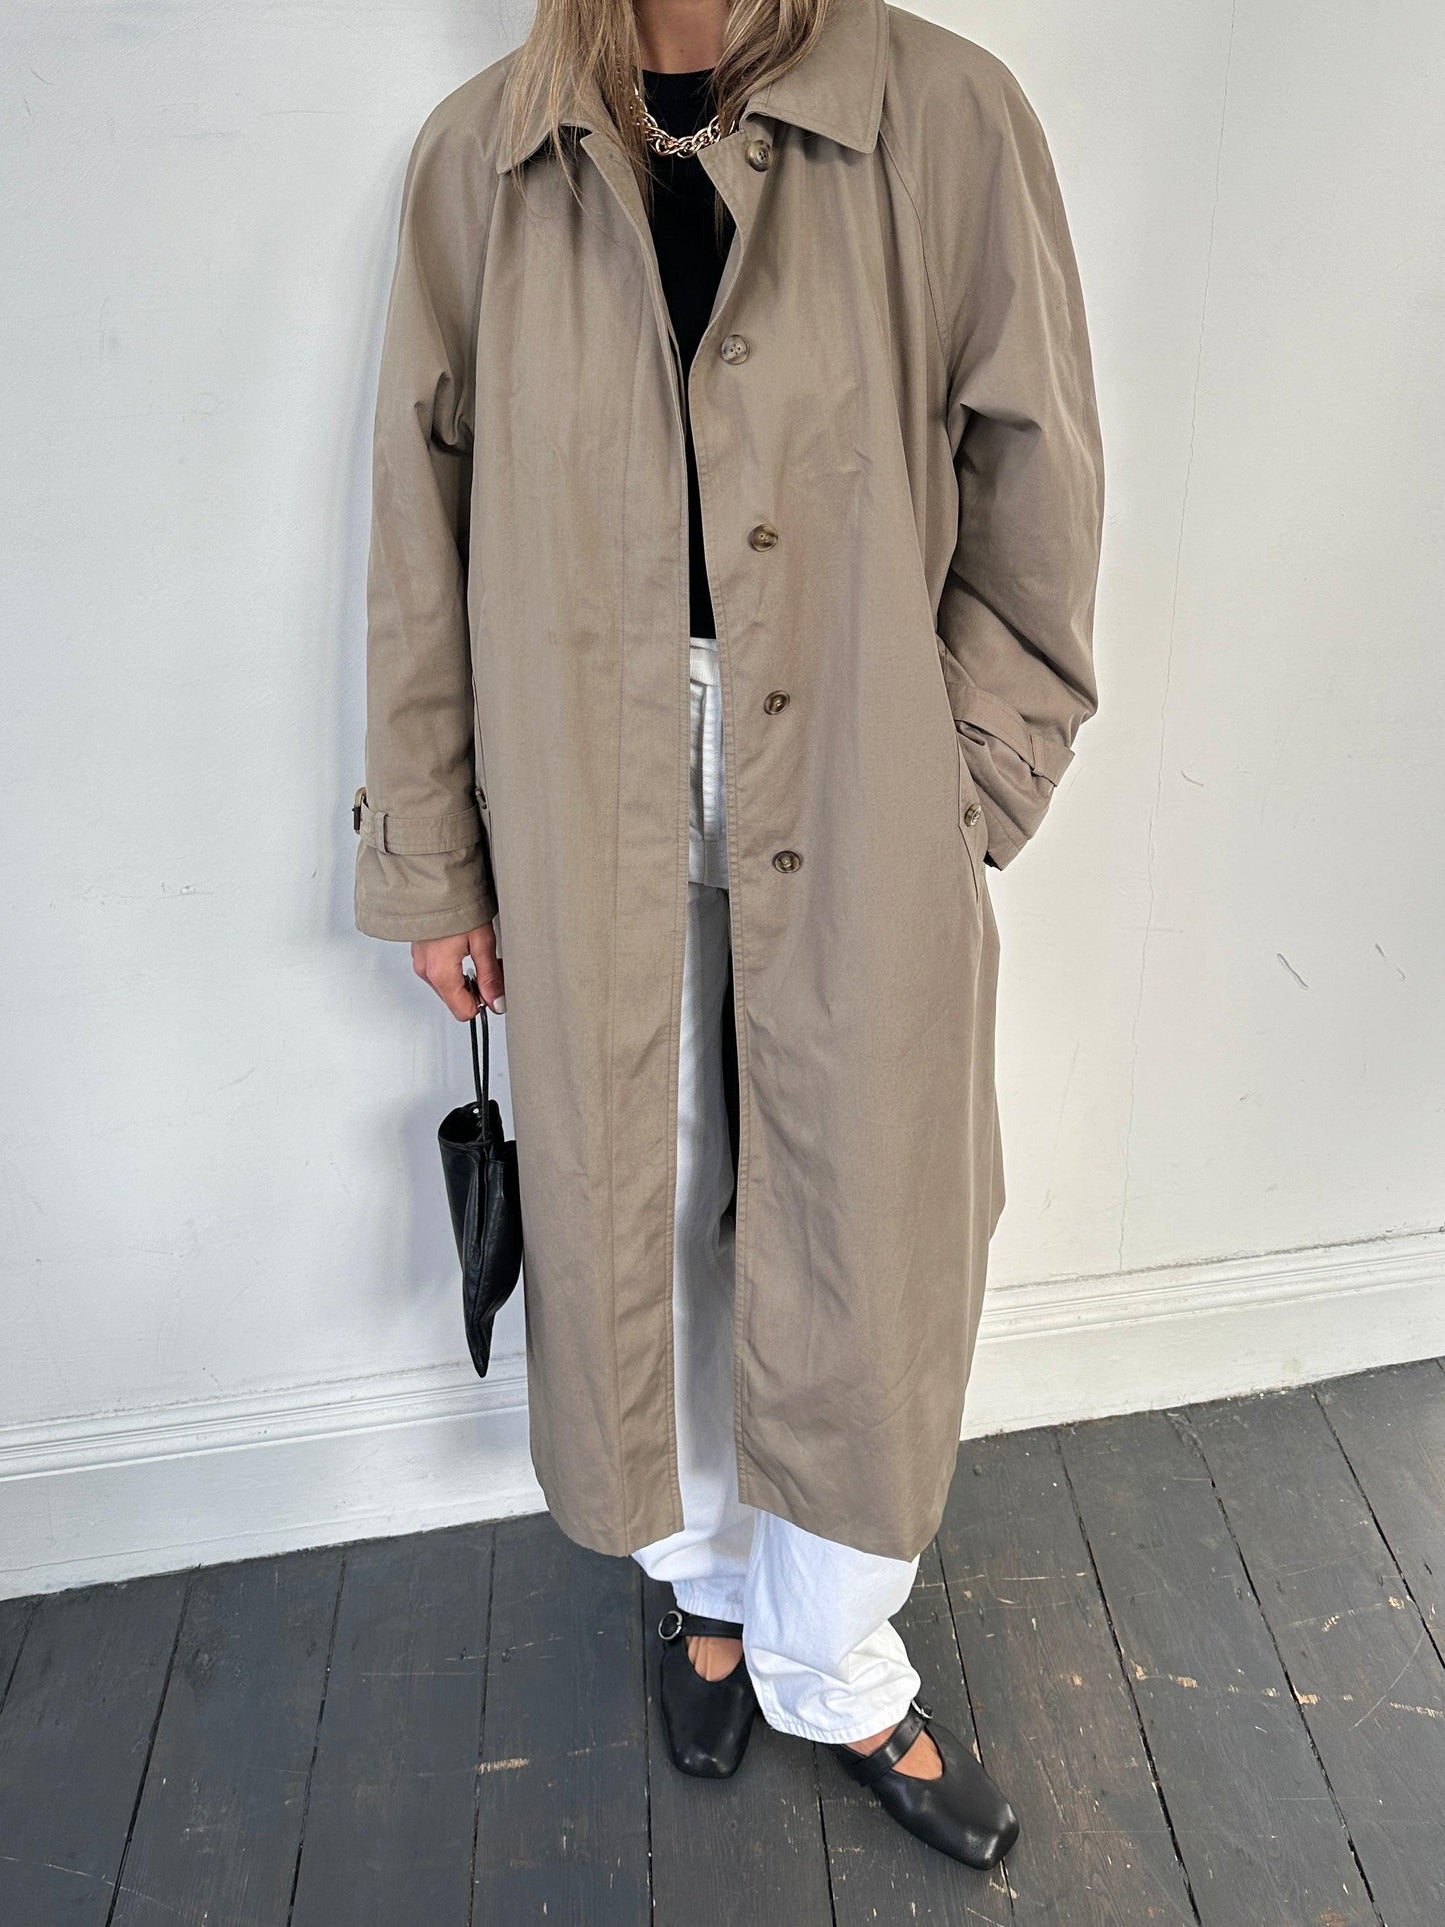 Vintage Water Resistant Concealed Placket Trench Coat - M/L - Known Source